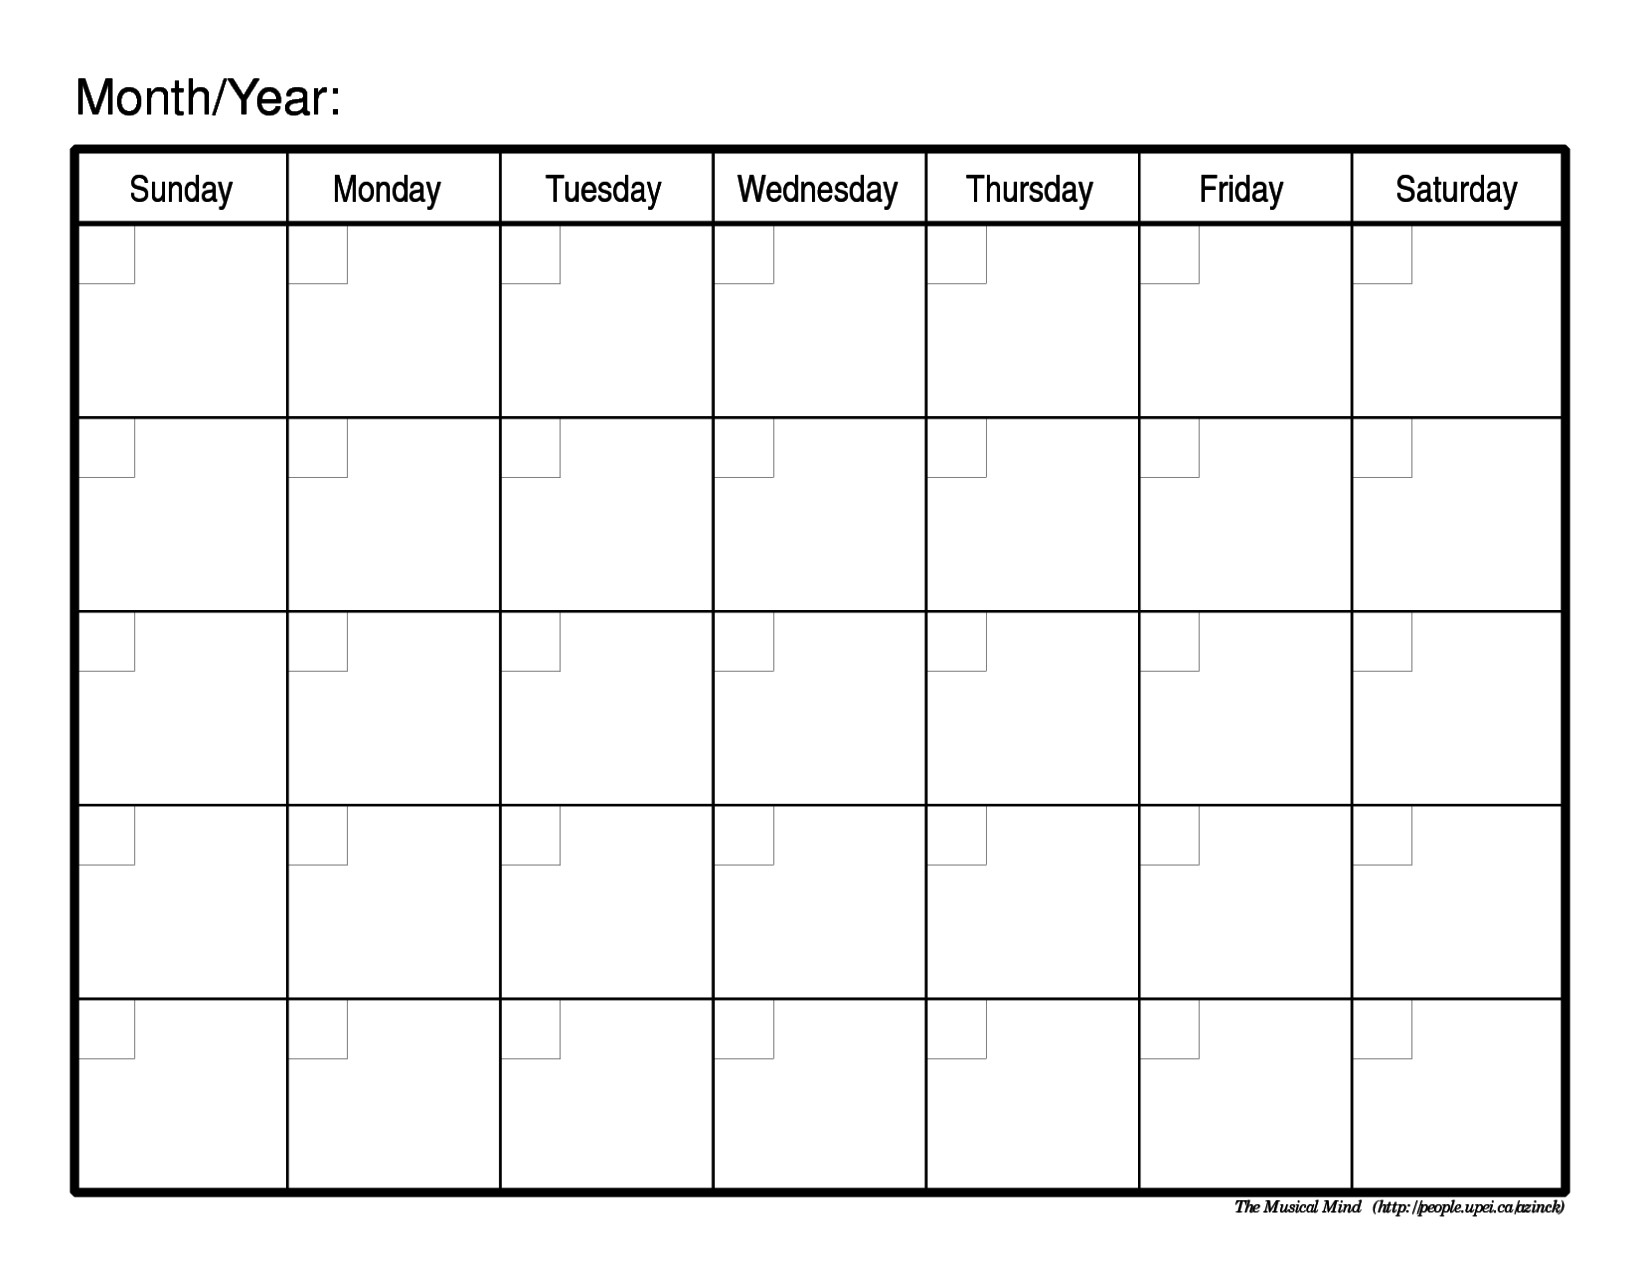 Schedule Template Free Blank Printable R Aaron The Artist Weekly inside Free Blank Templates To Print